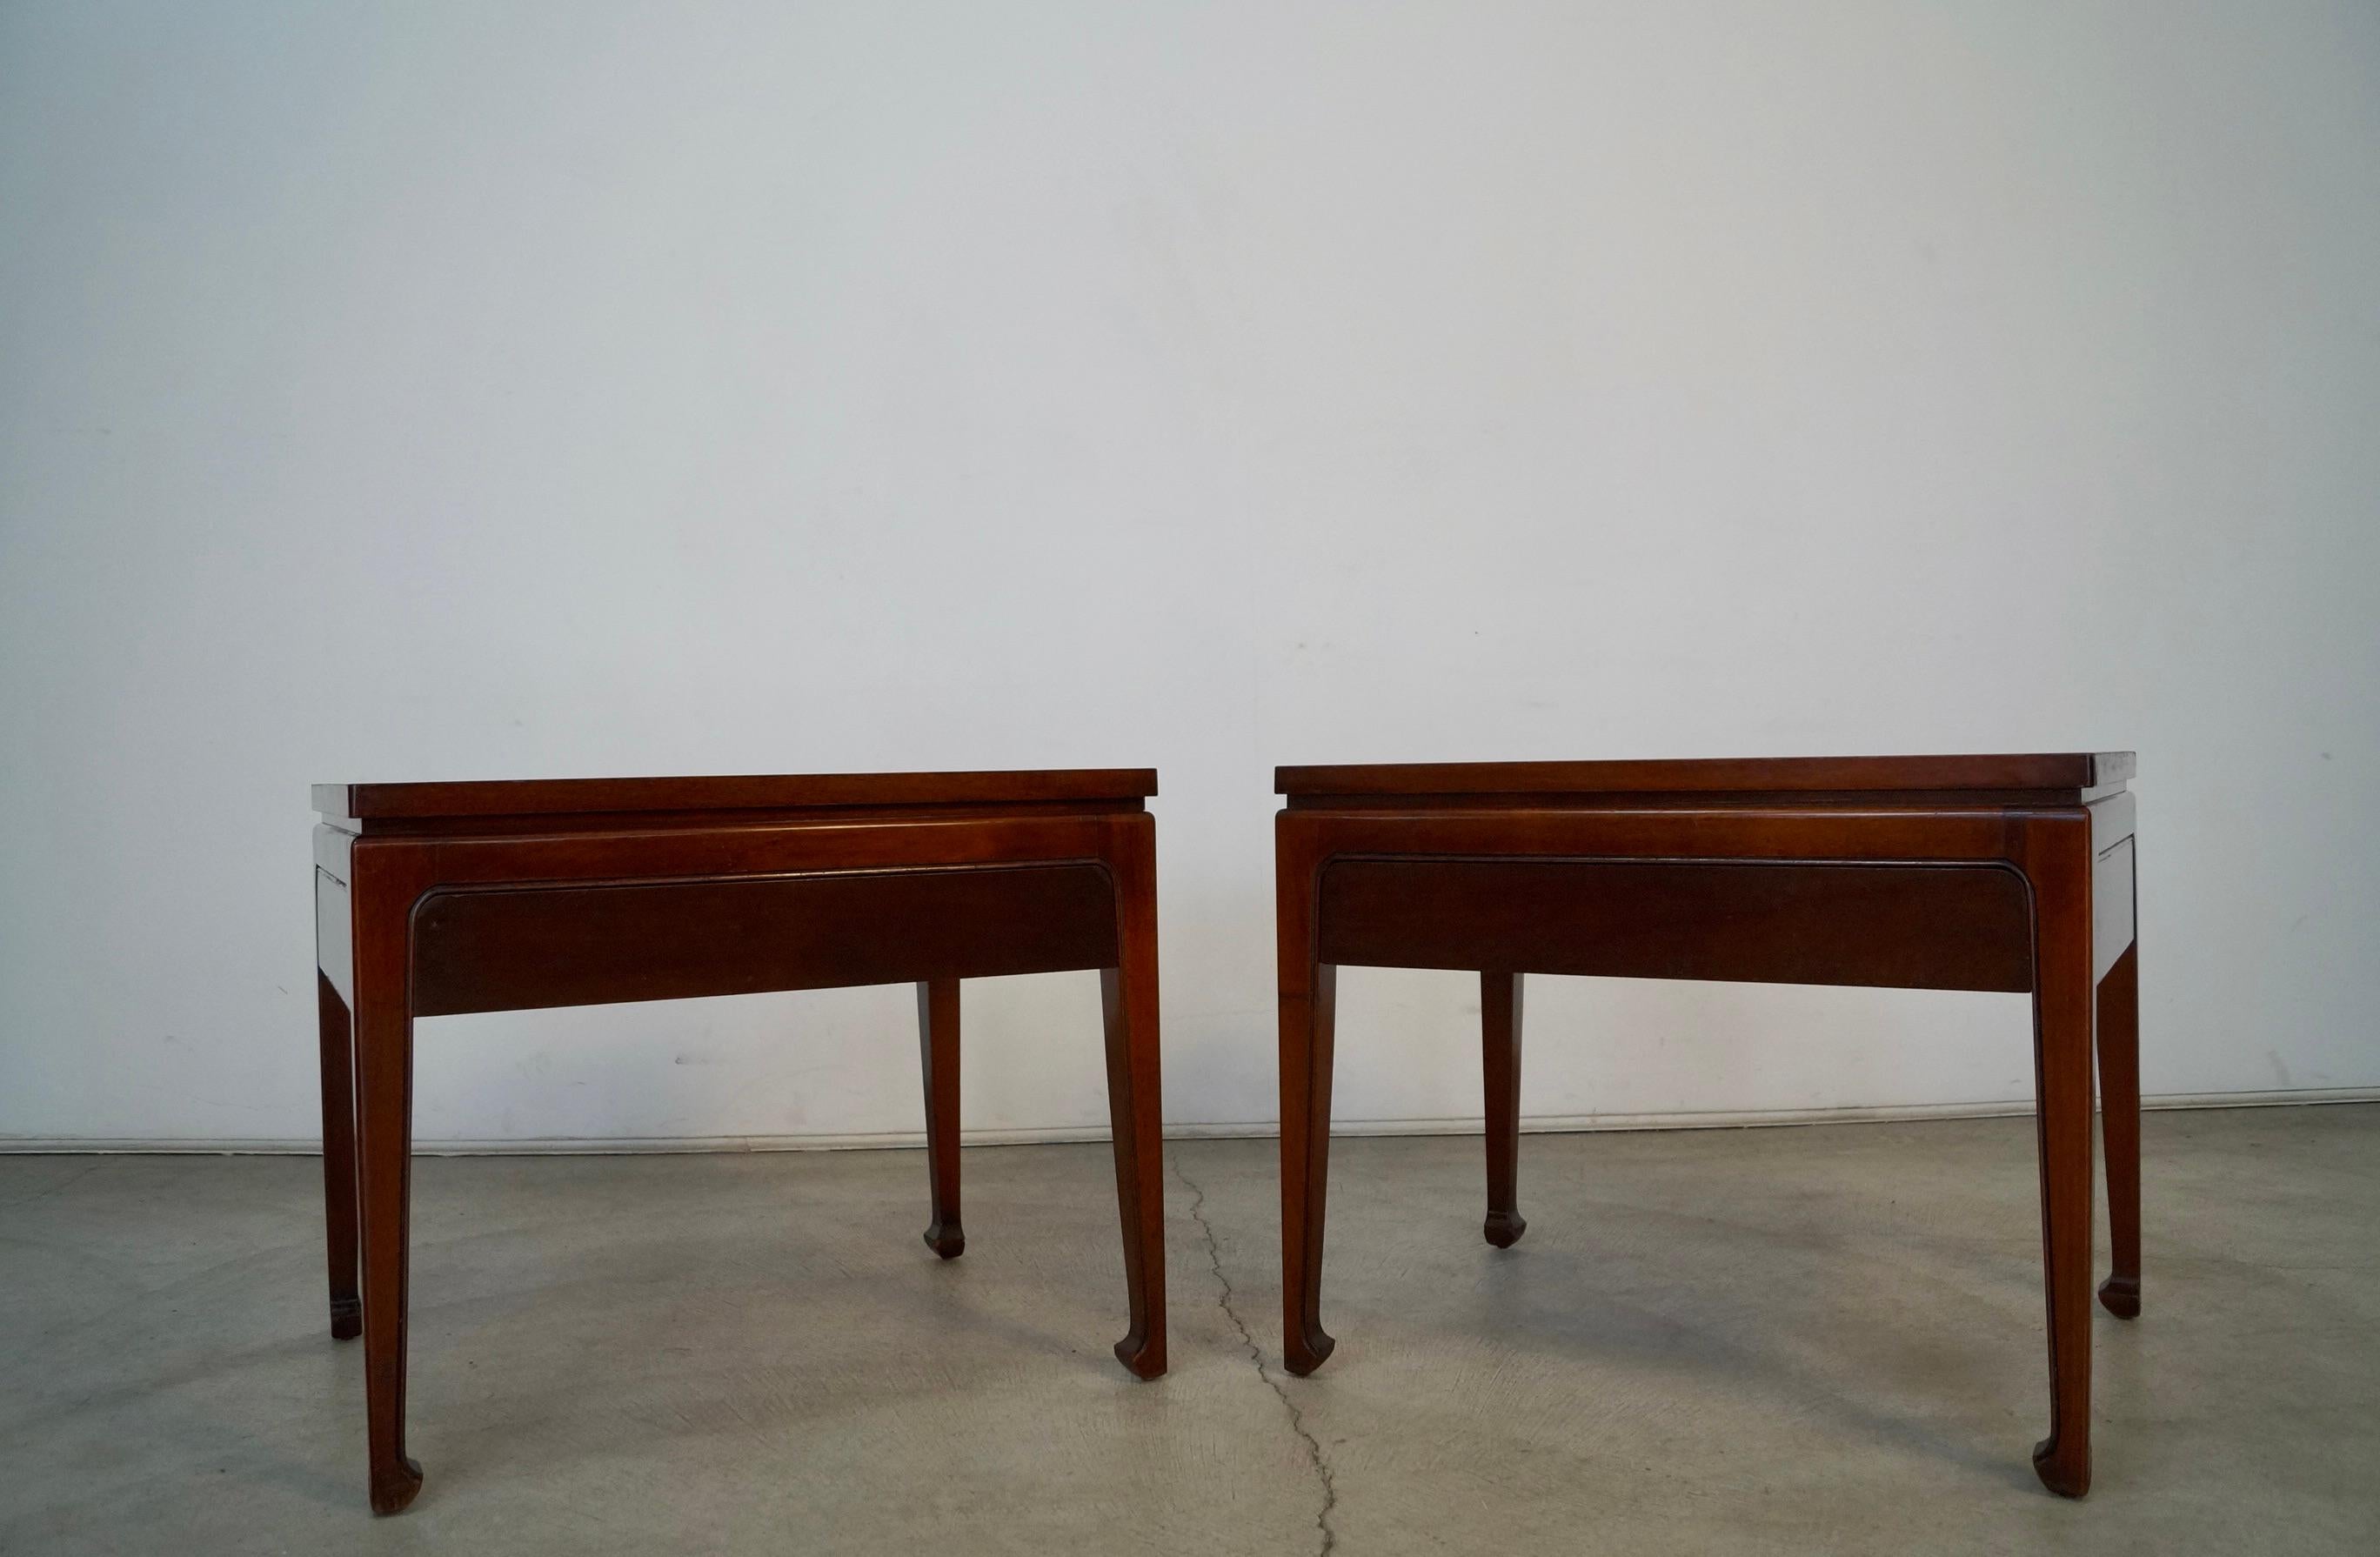 American 1950's Mid-Century Modern Fine Arts Furniture Nightstands / Side Tables - A Pair